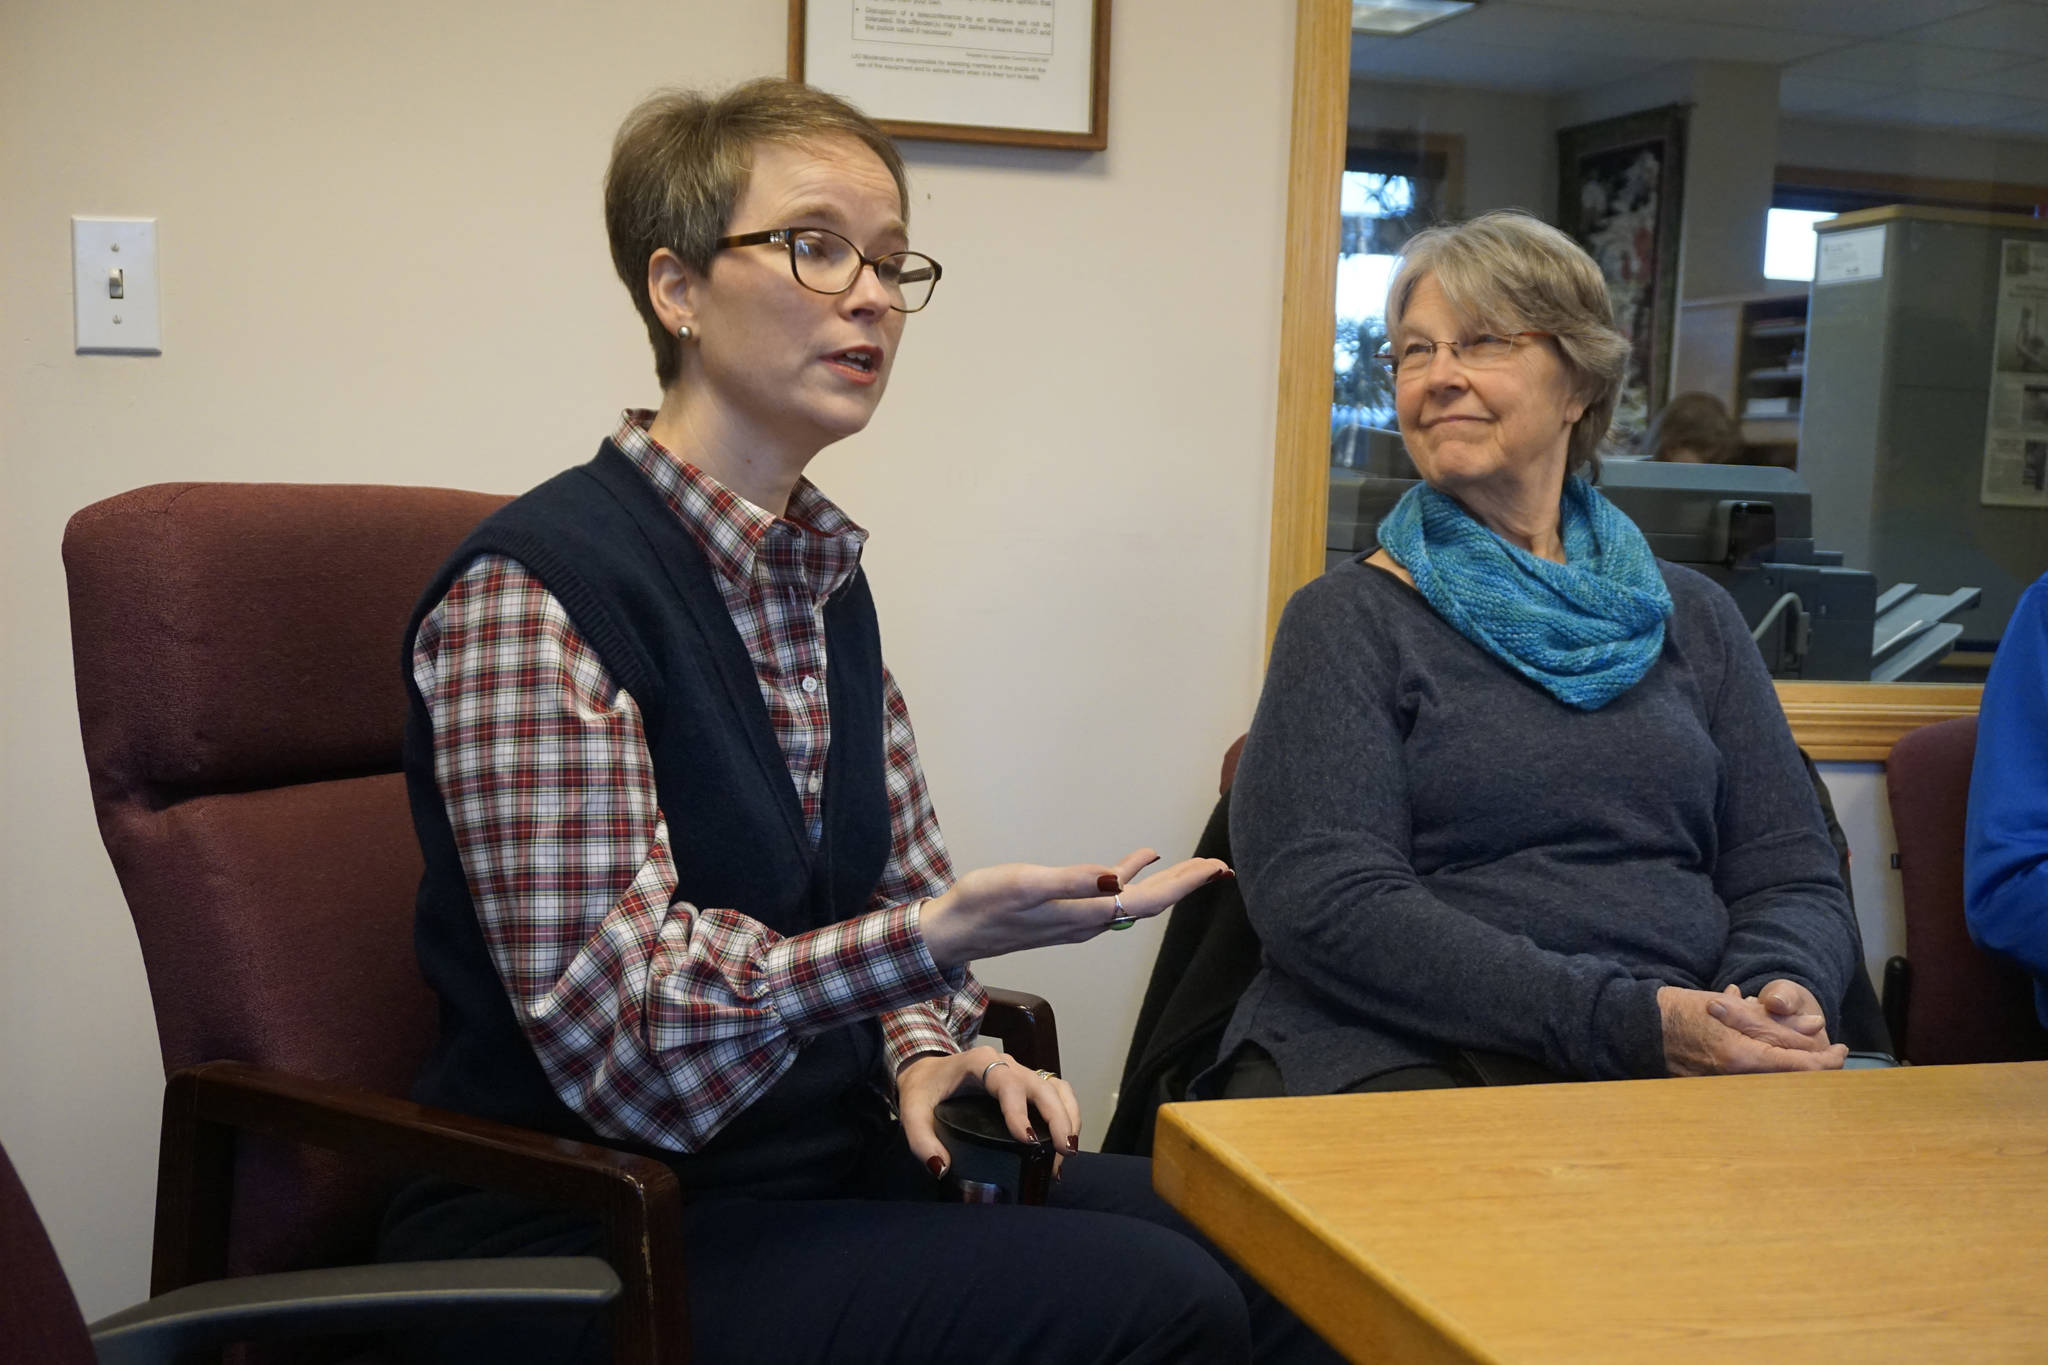 Rep.-elect Sarah Vance, R-Homer, speaks at a meeting on Thursday, Jan. 3, 2019, at the Homer Legislative Information Office in Homer, Alaska. Ardith Mumma, right, listens. As she headed to Juneau for the next session of the Alaska Legislature, Vance held meetings in Homer, Anchor Point, Ninilchik and Kasilof last weekend. (Photo by Michael Armstrong/Homer News)